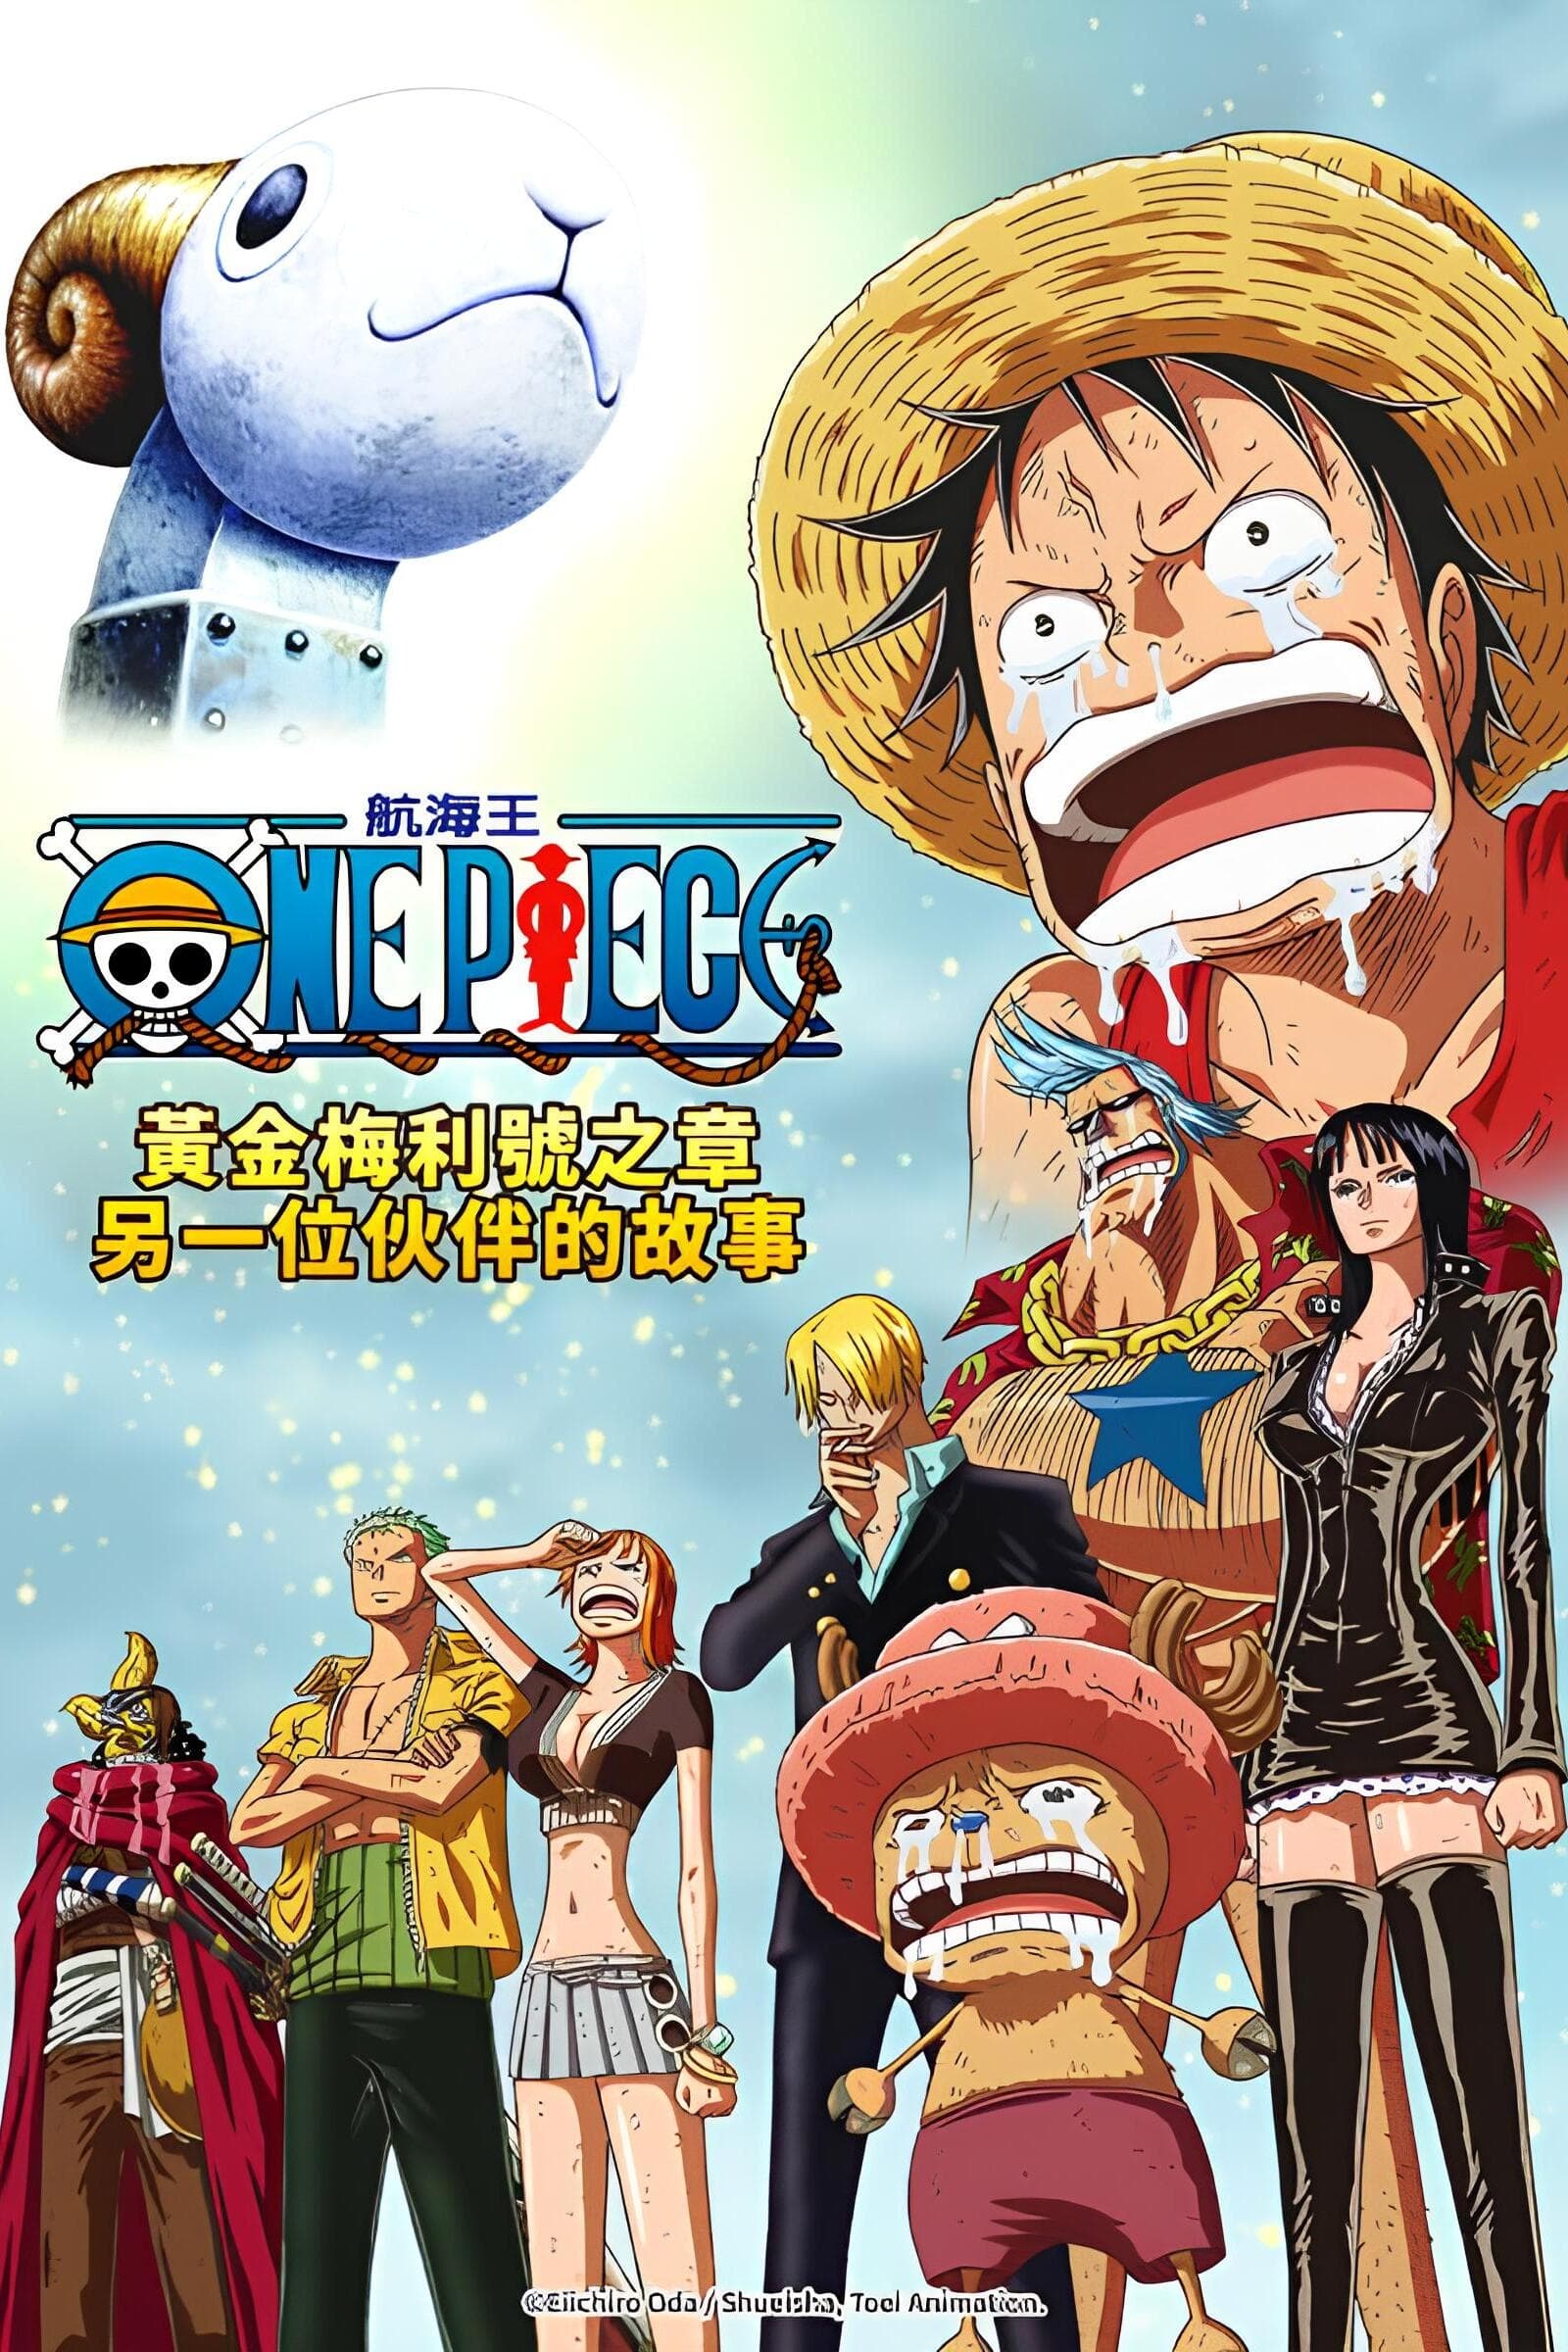 One Piece: Episode of Nami - Tears of a Navigator and the Bonds of Friends  (2013) - Plex